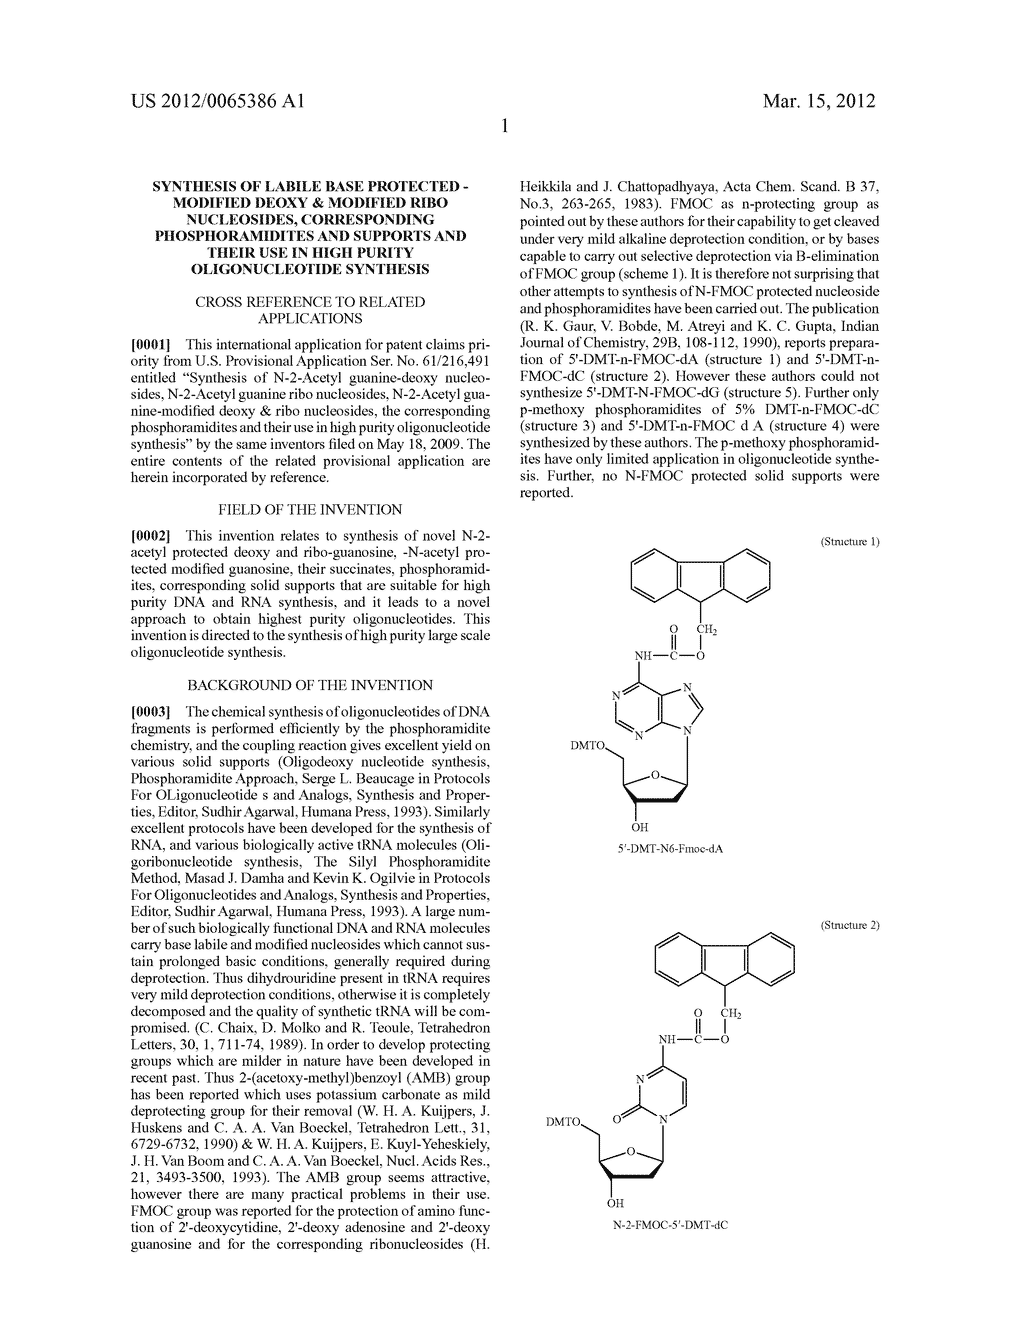 SYNTHESIS OF LABILE BASE PROTECTED - MODIFIED DEOXY & MODIFIED RIBO     NUCLEOSIDES, CORRESPONDING PHOSPHORAMIDITES AND SUPPORTS AND THEIR USE IN     HIGH PURITY OLIGONUCLEOTIDE SYNTHESIS - diagram, schematic, and image 19